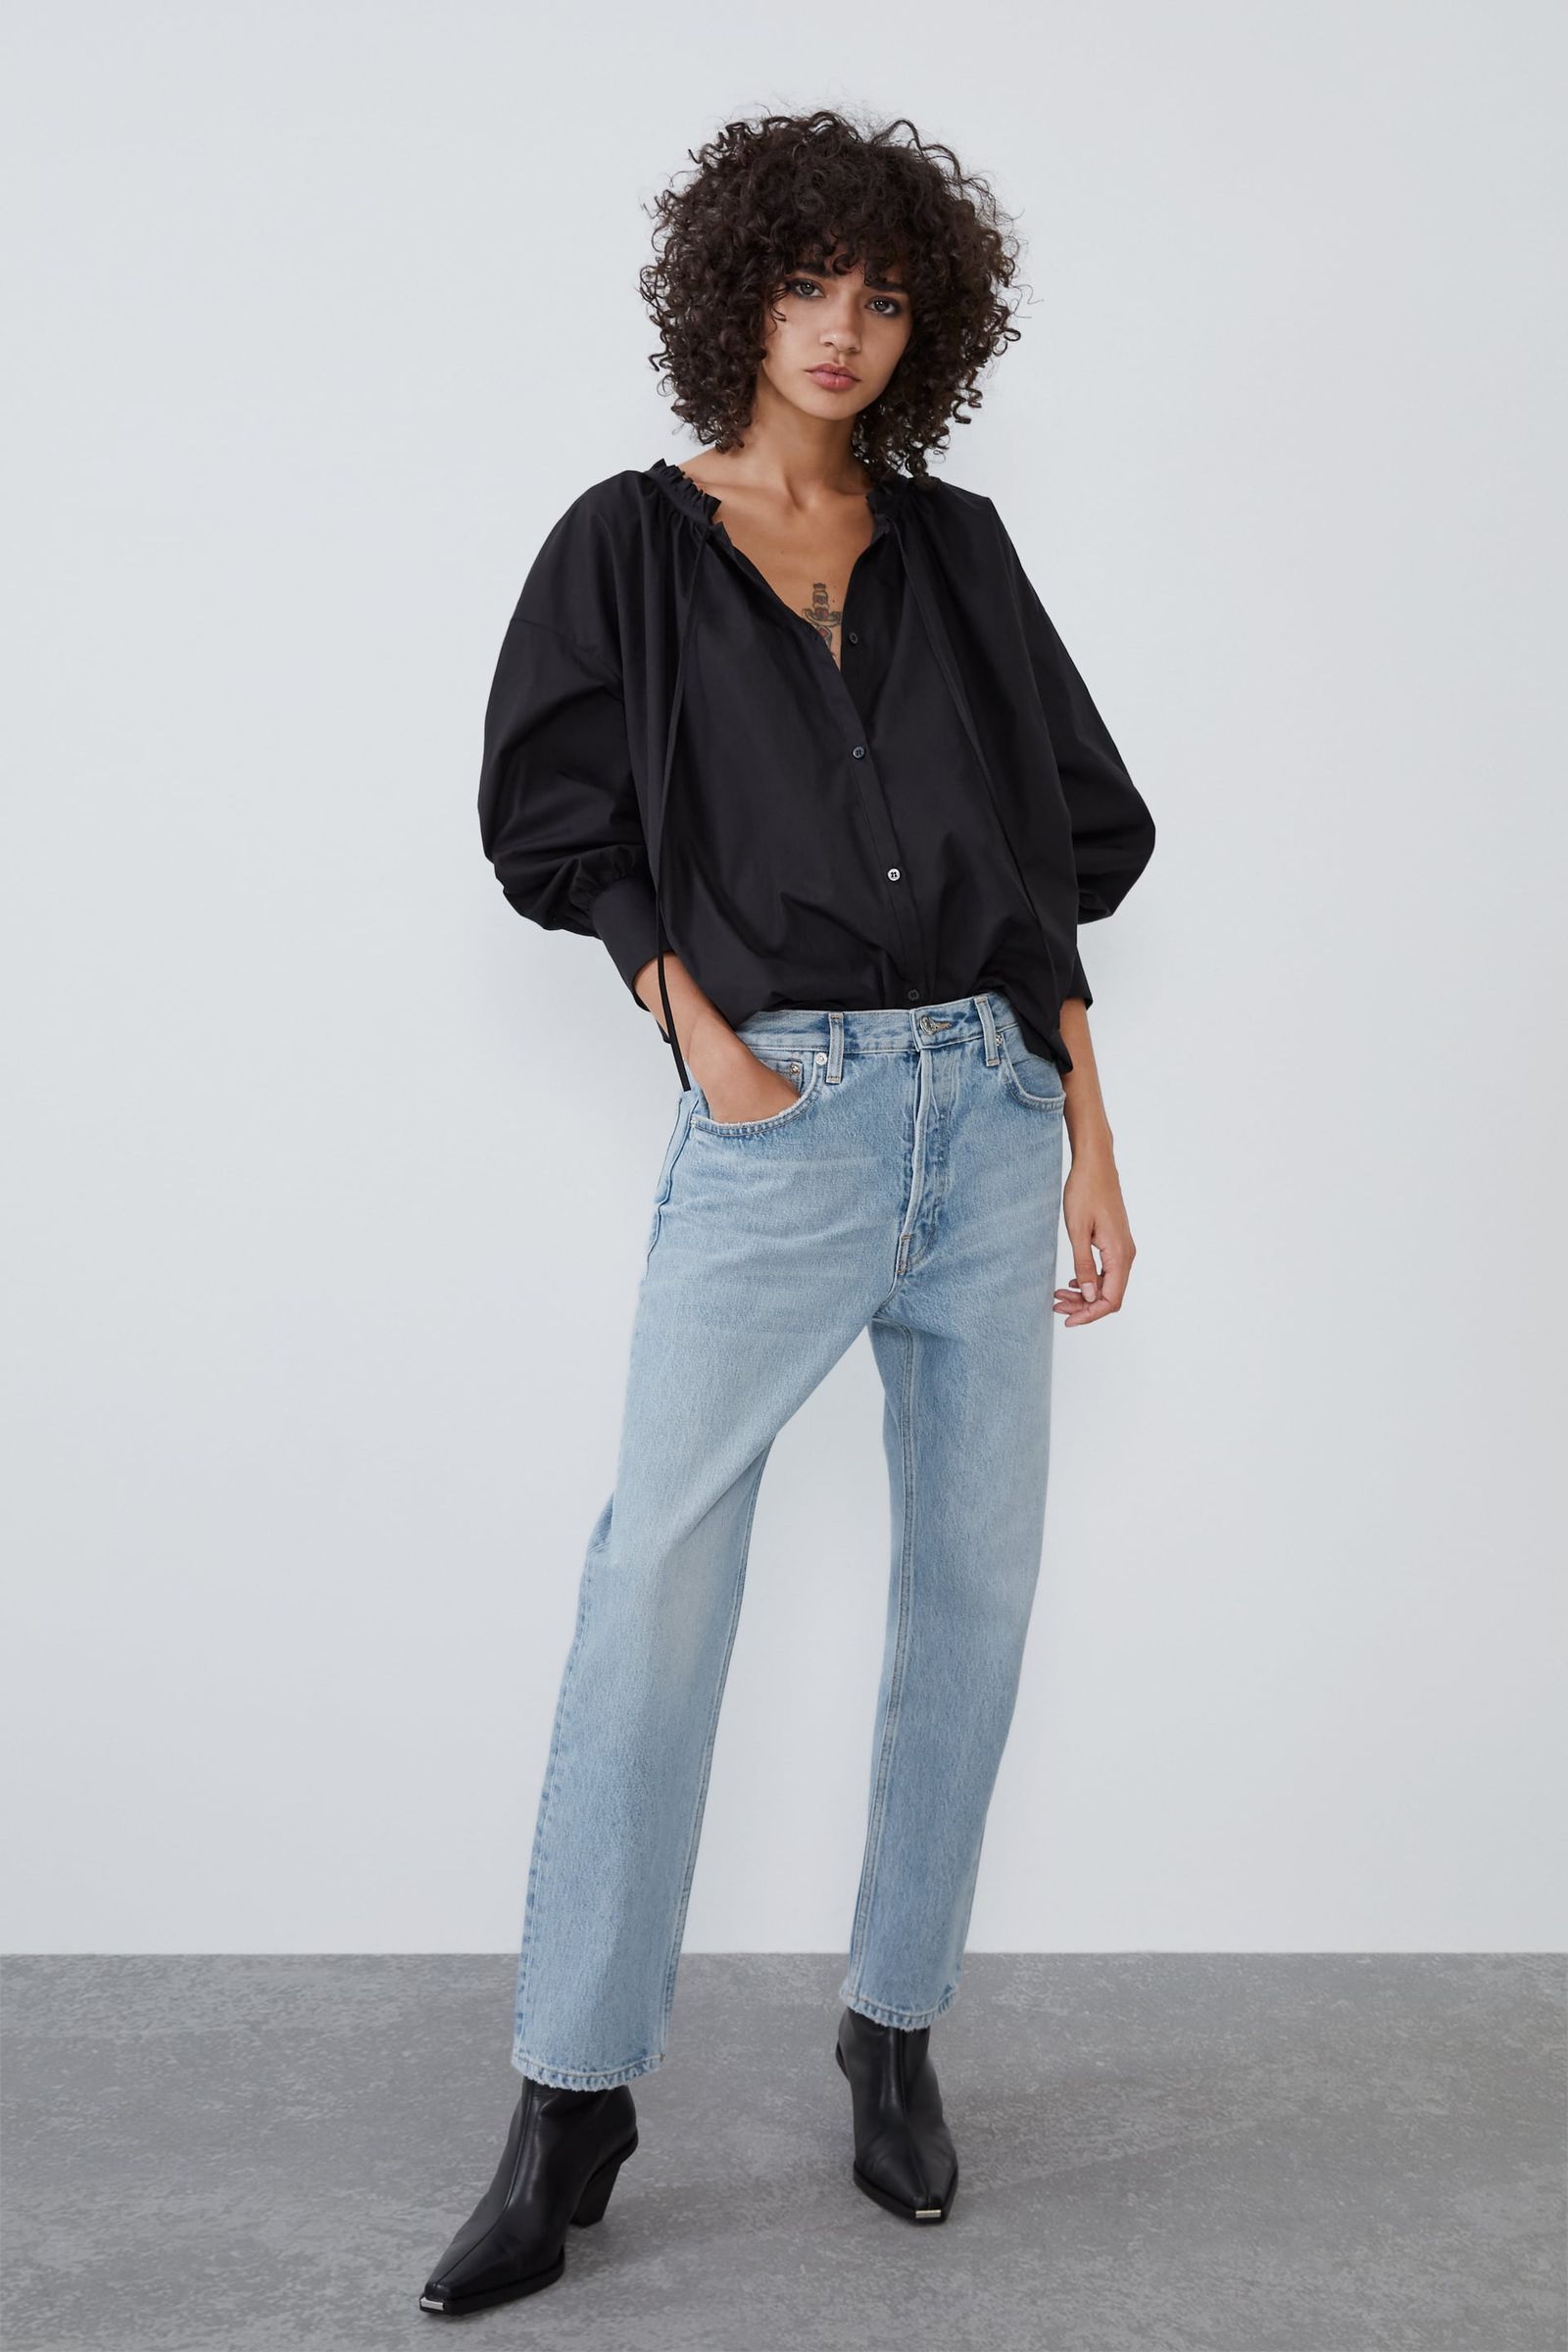 21 Ways to Style Your Zara Jeans This Season | Who What Wear